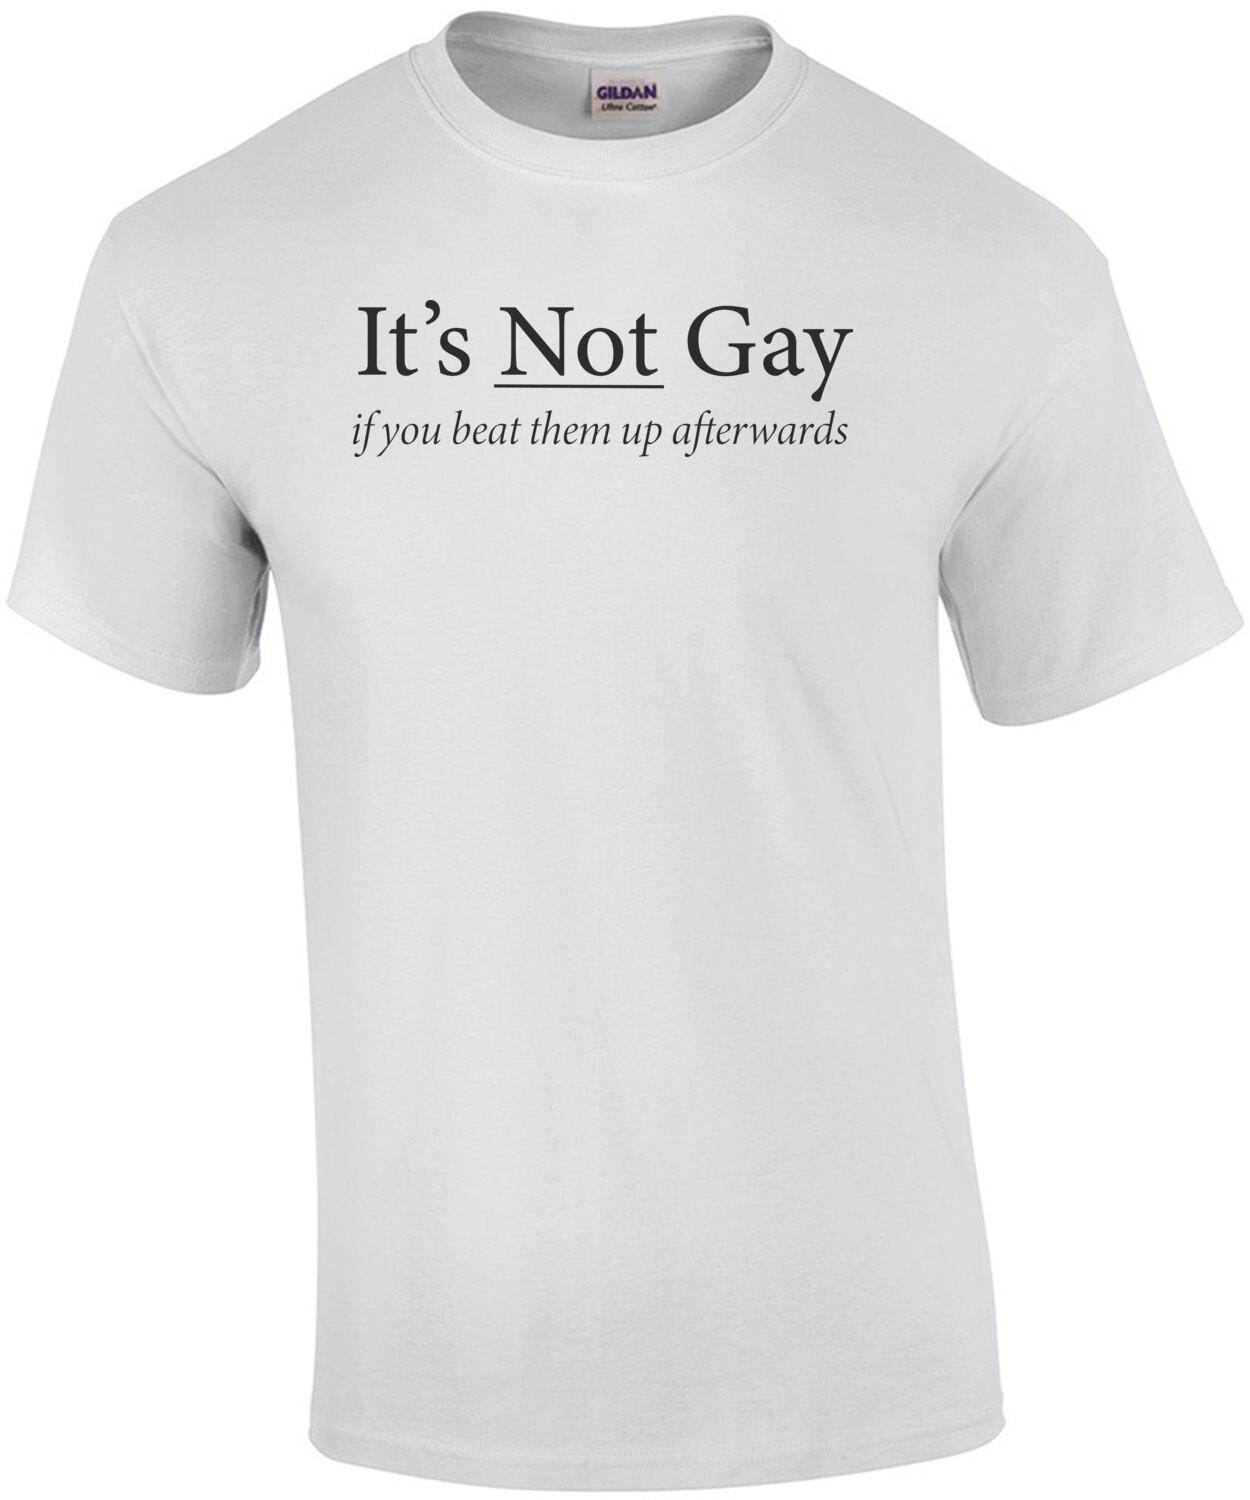 It's not gay if you beat them up afterwards - offensive t-shirt